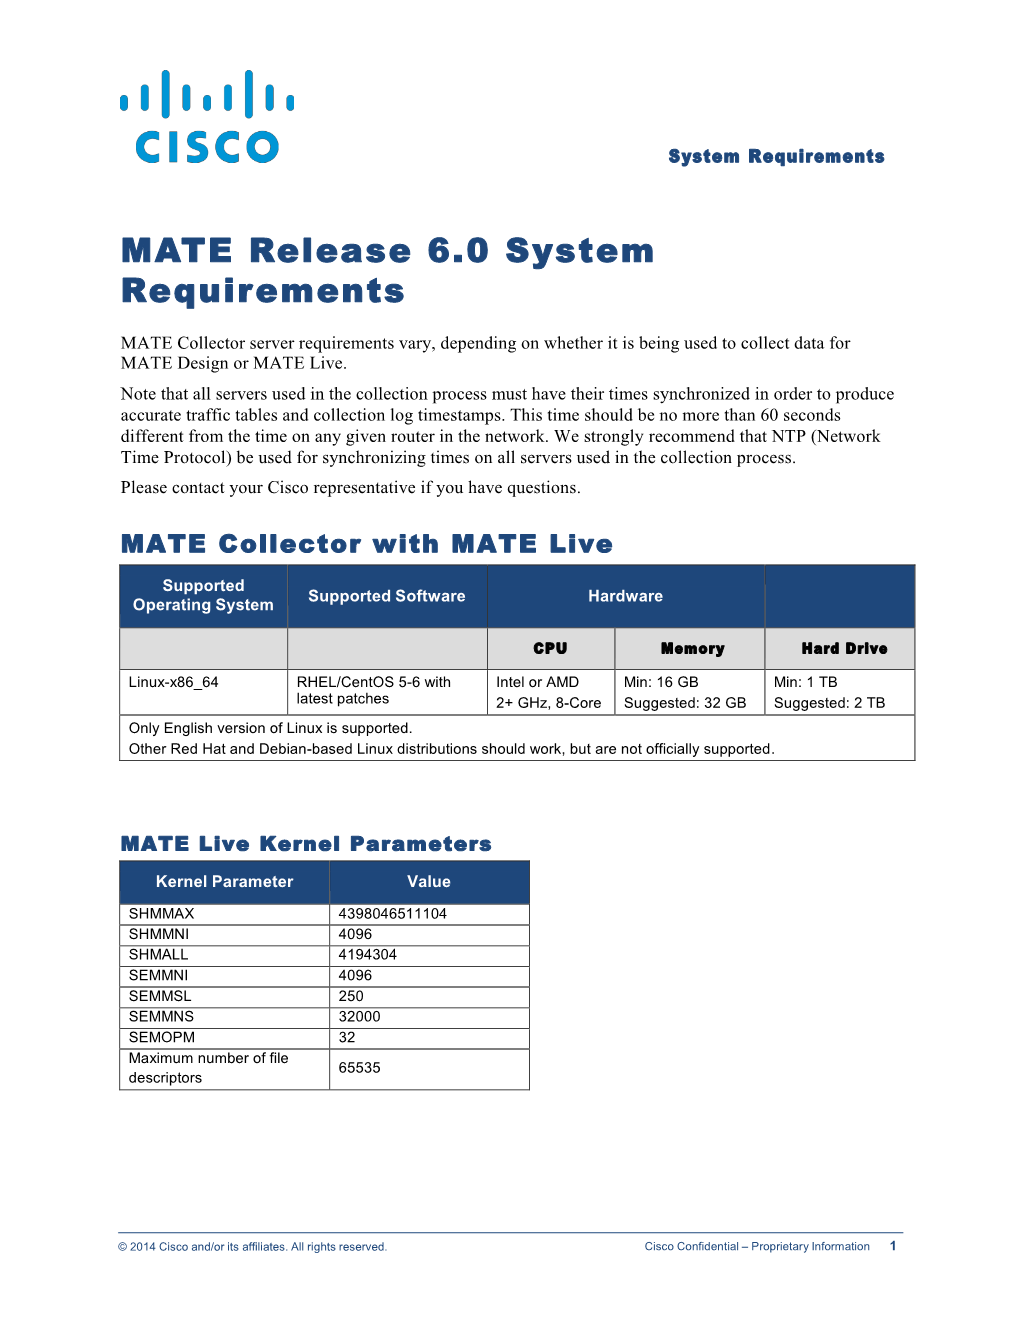 MATE Release 6.0 System Requirements